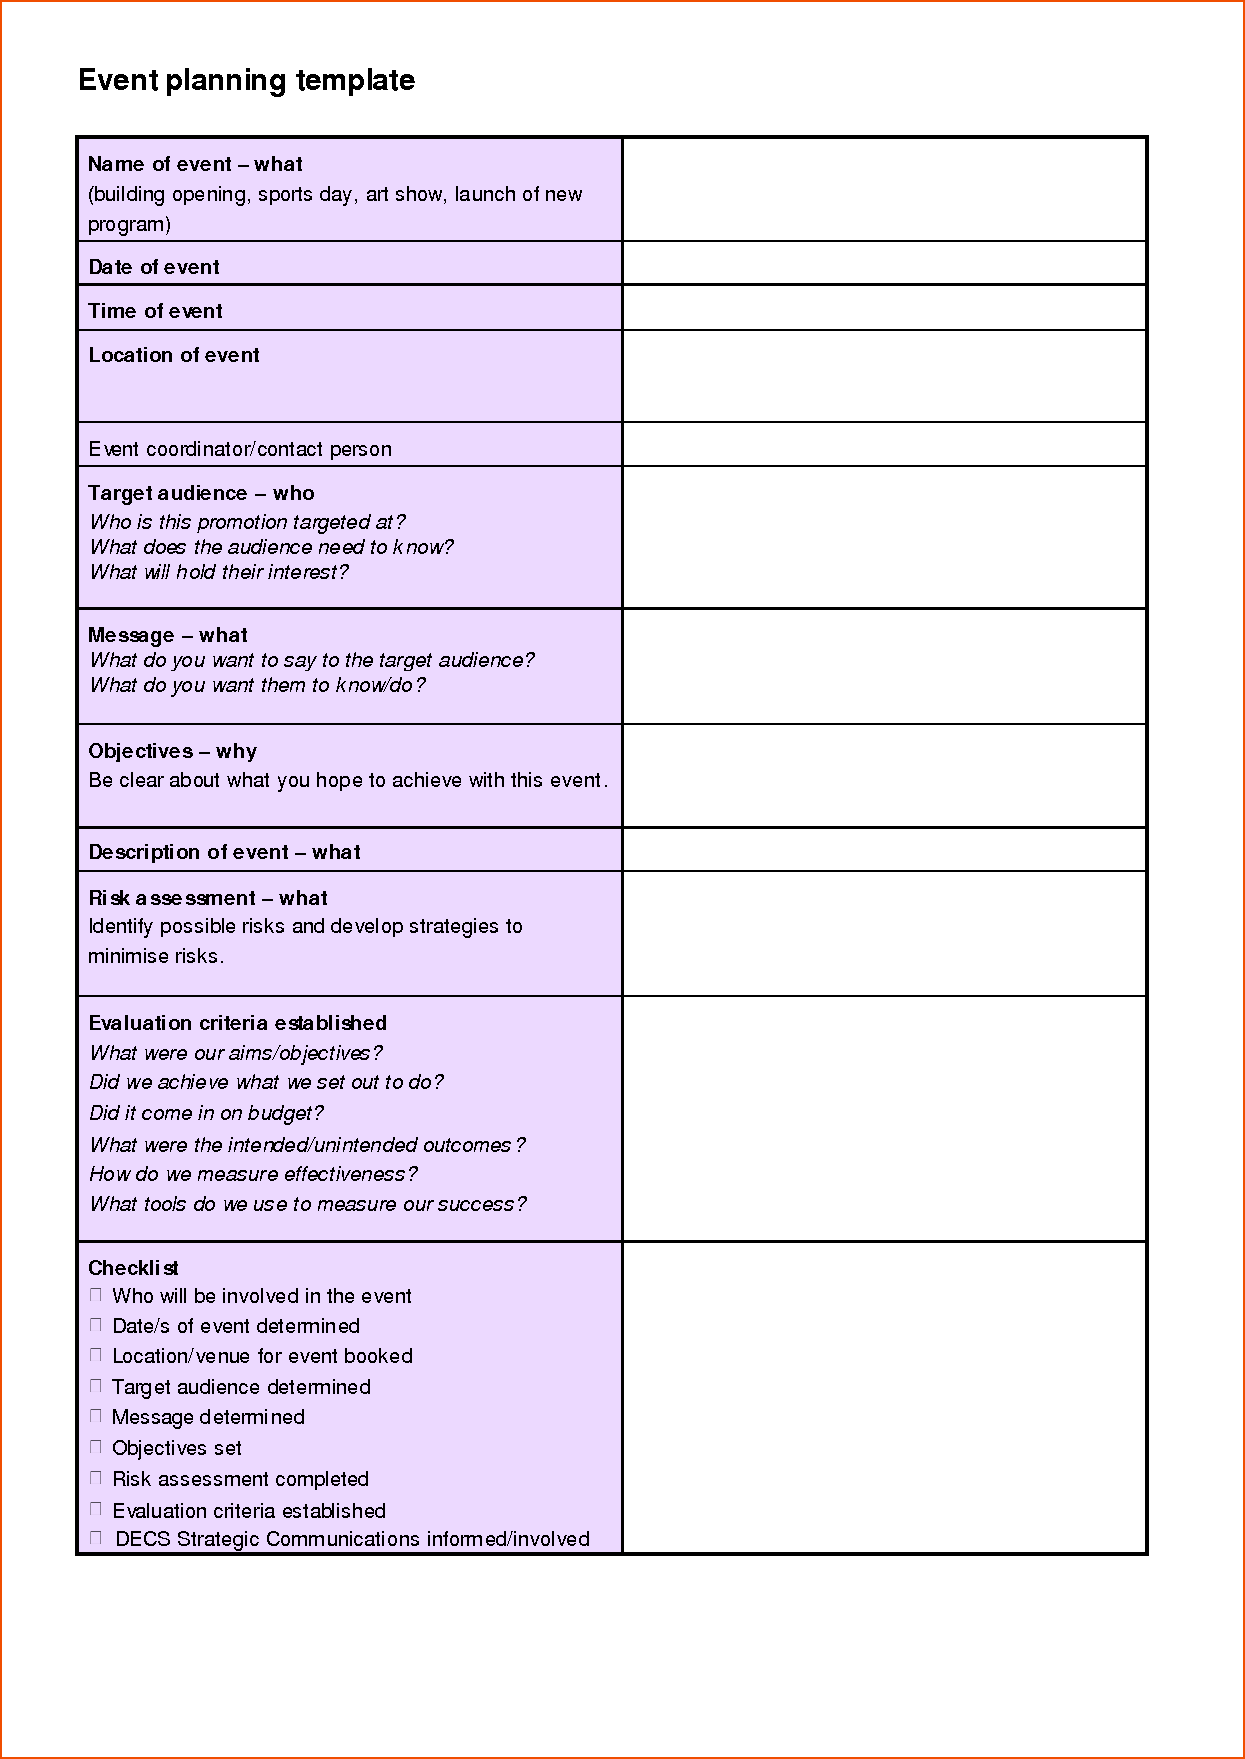 event planning template doc   Into.anysearch.co